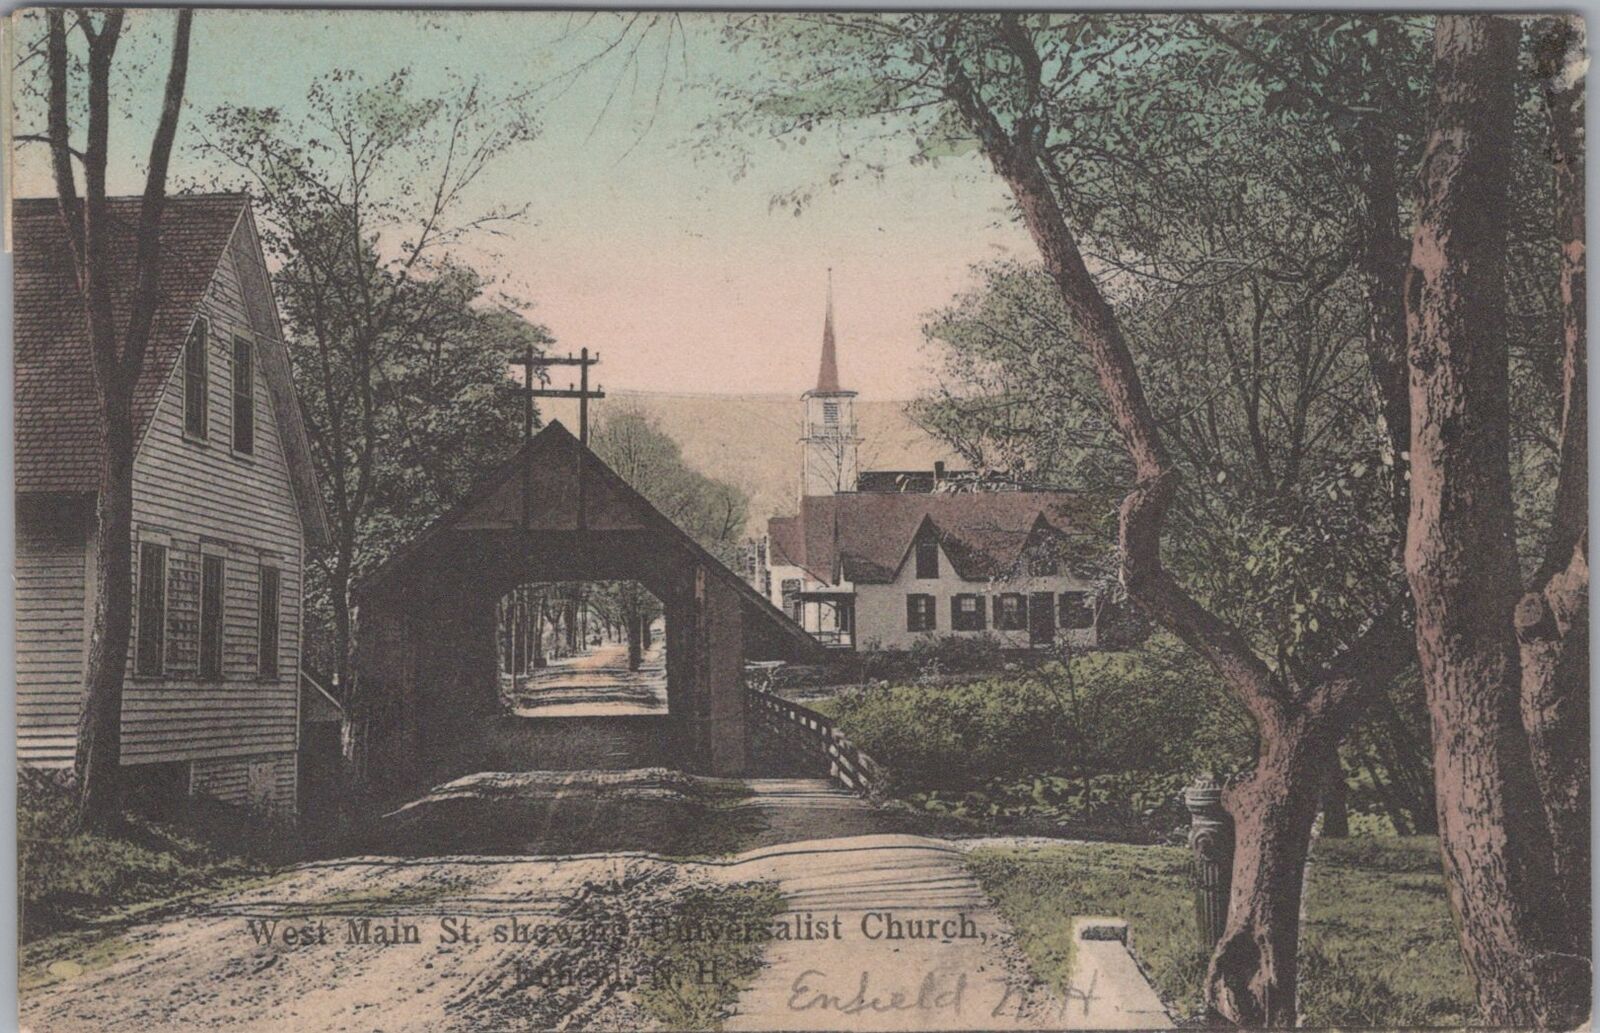 West Main St. showing Universalist Church, Enfield New Hampshire 1942 Postcard